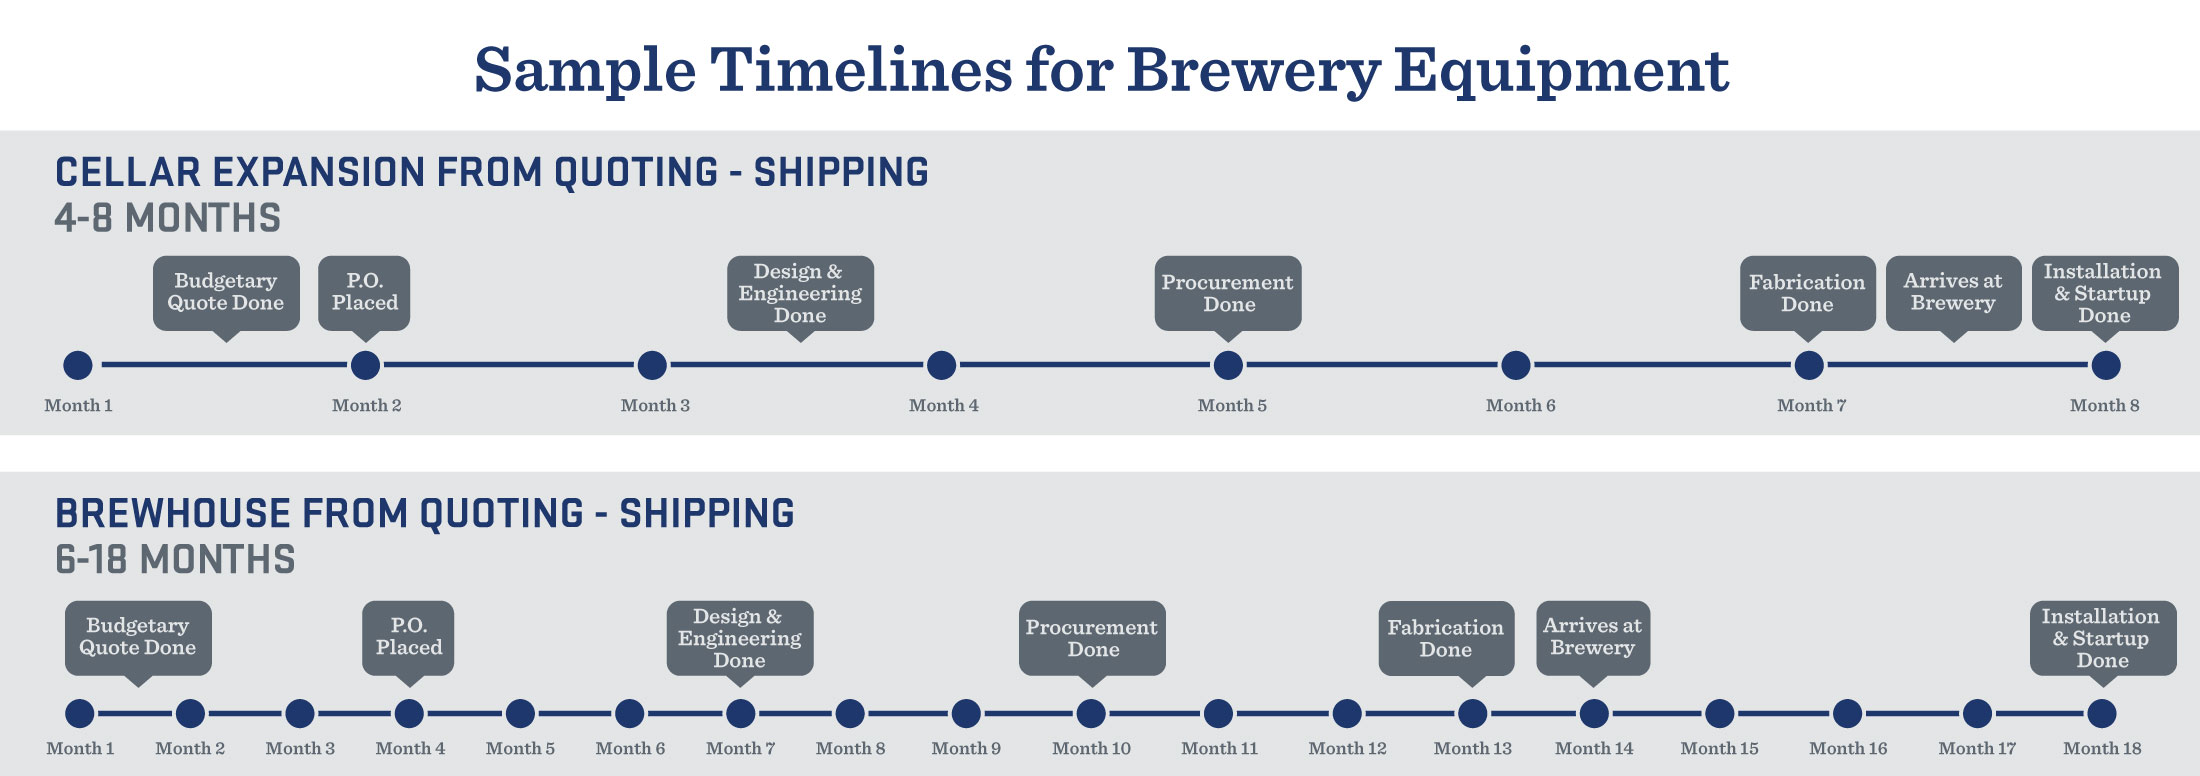 Brewery Equipment Purchasing Timeline